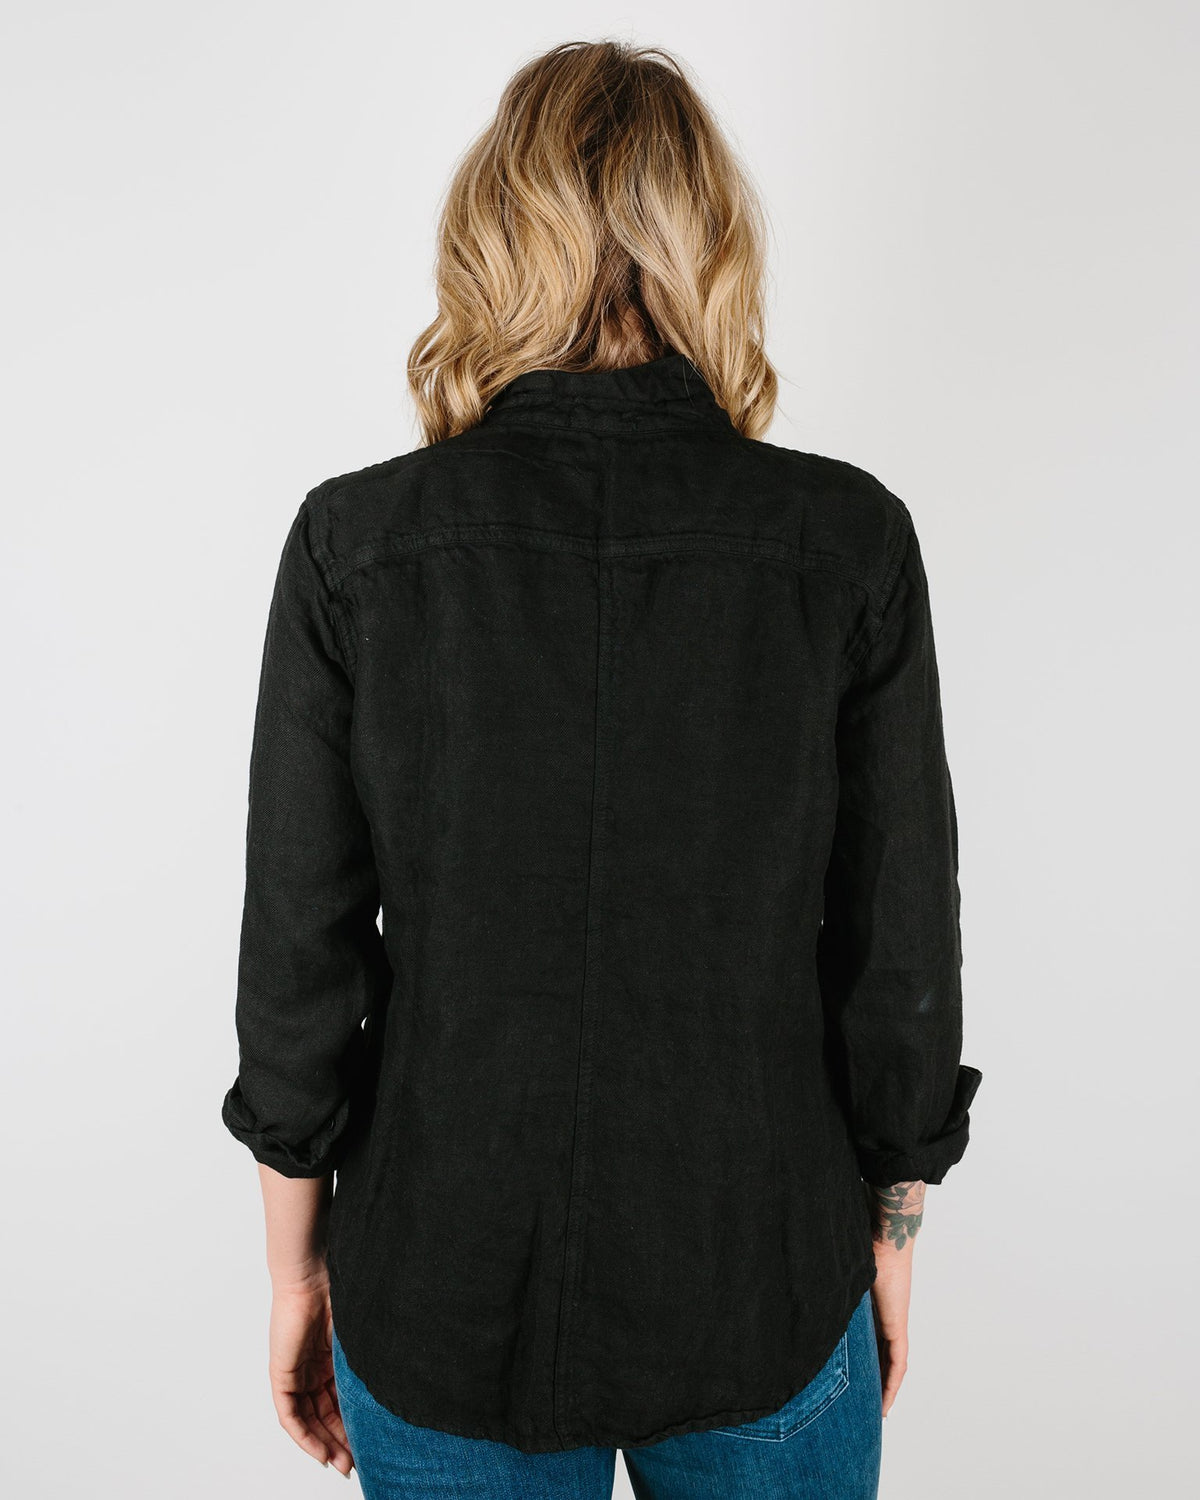 CP Shades Clothing Sloane Blouse in Black Heavy Weight Linen